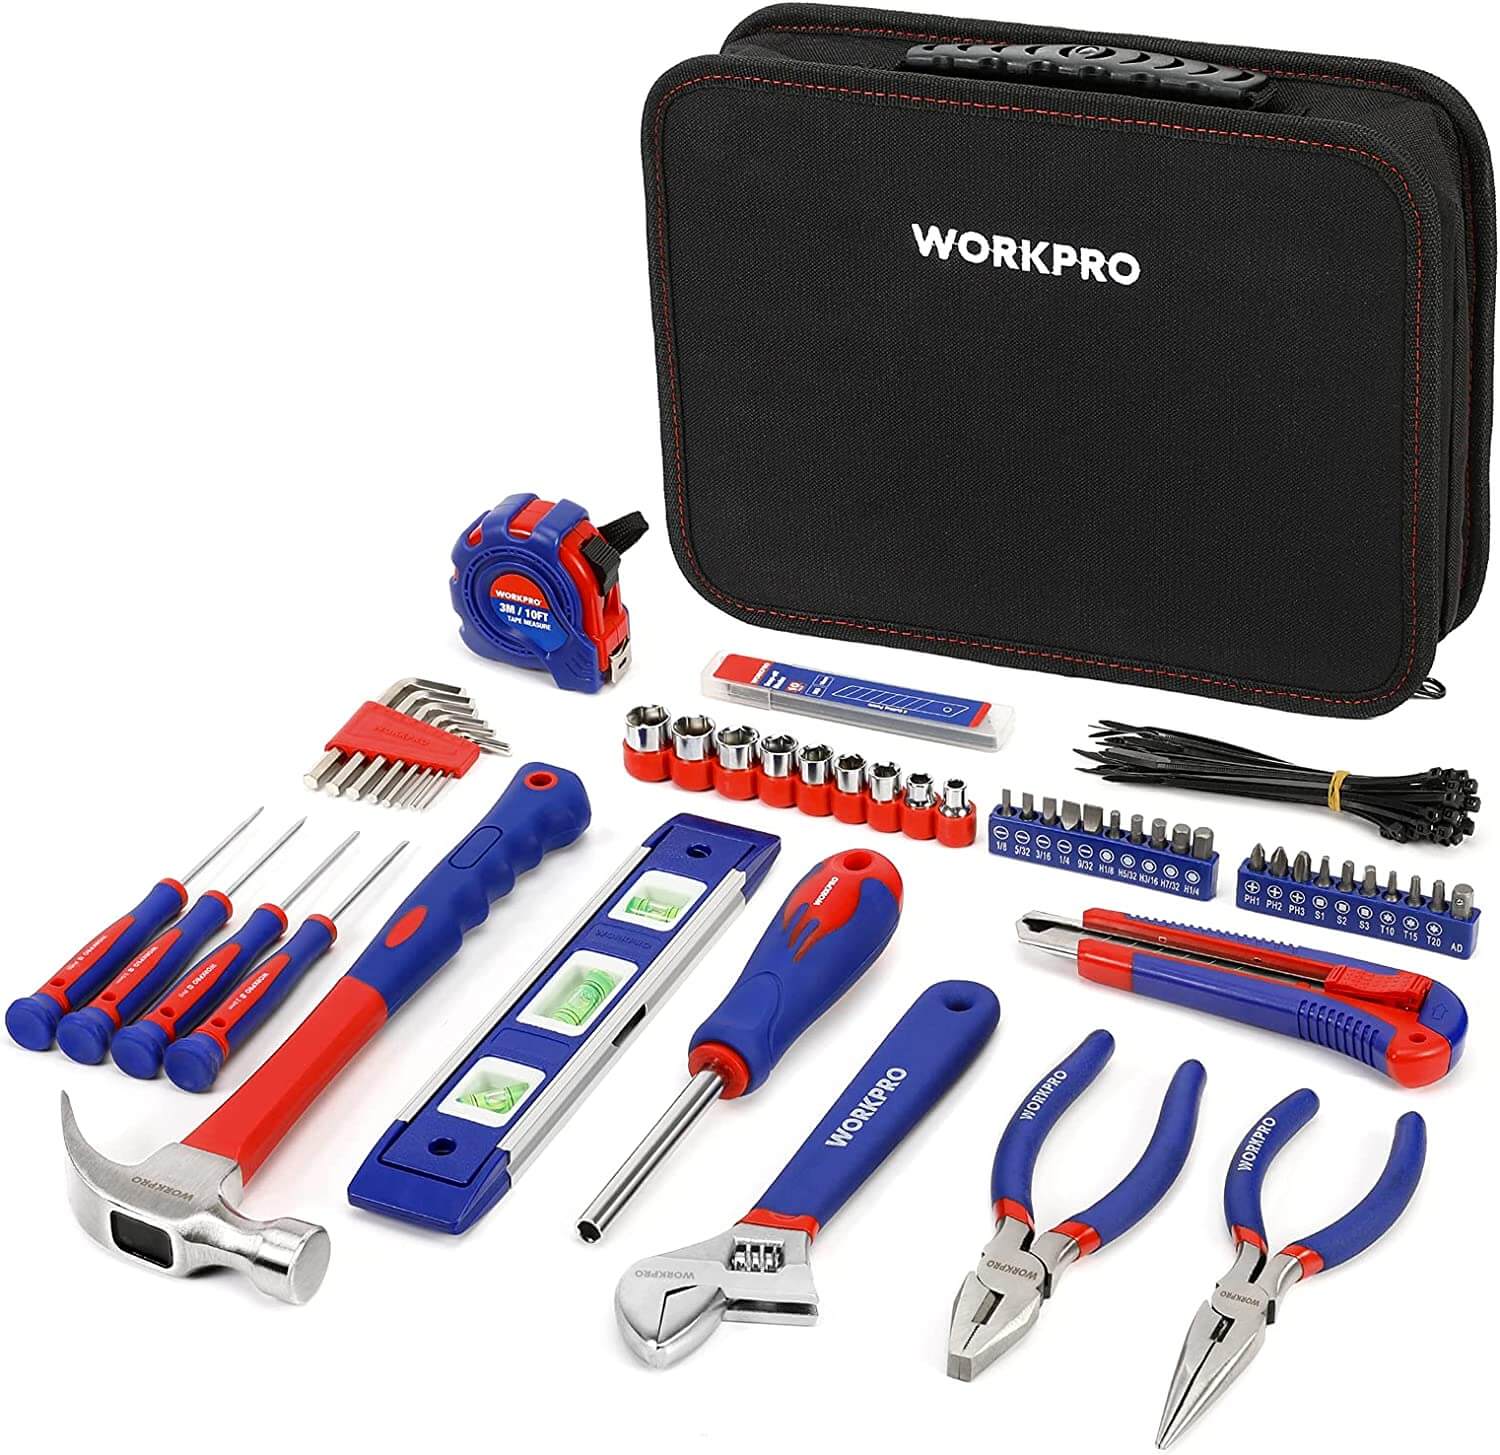 WorkPro 100-piece Home Tool Kit